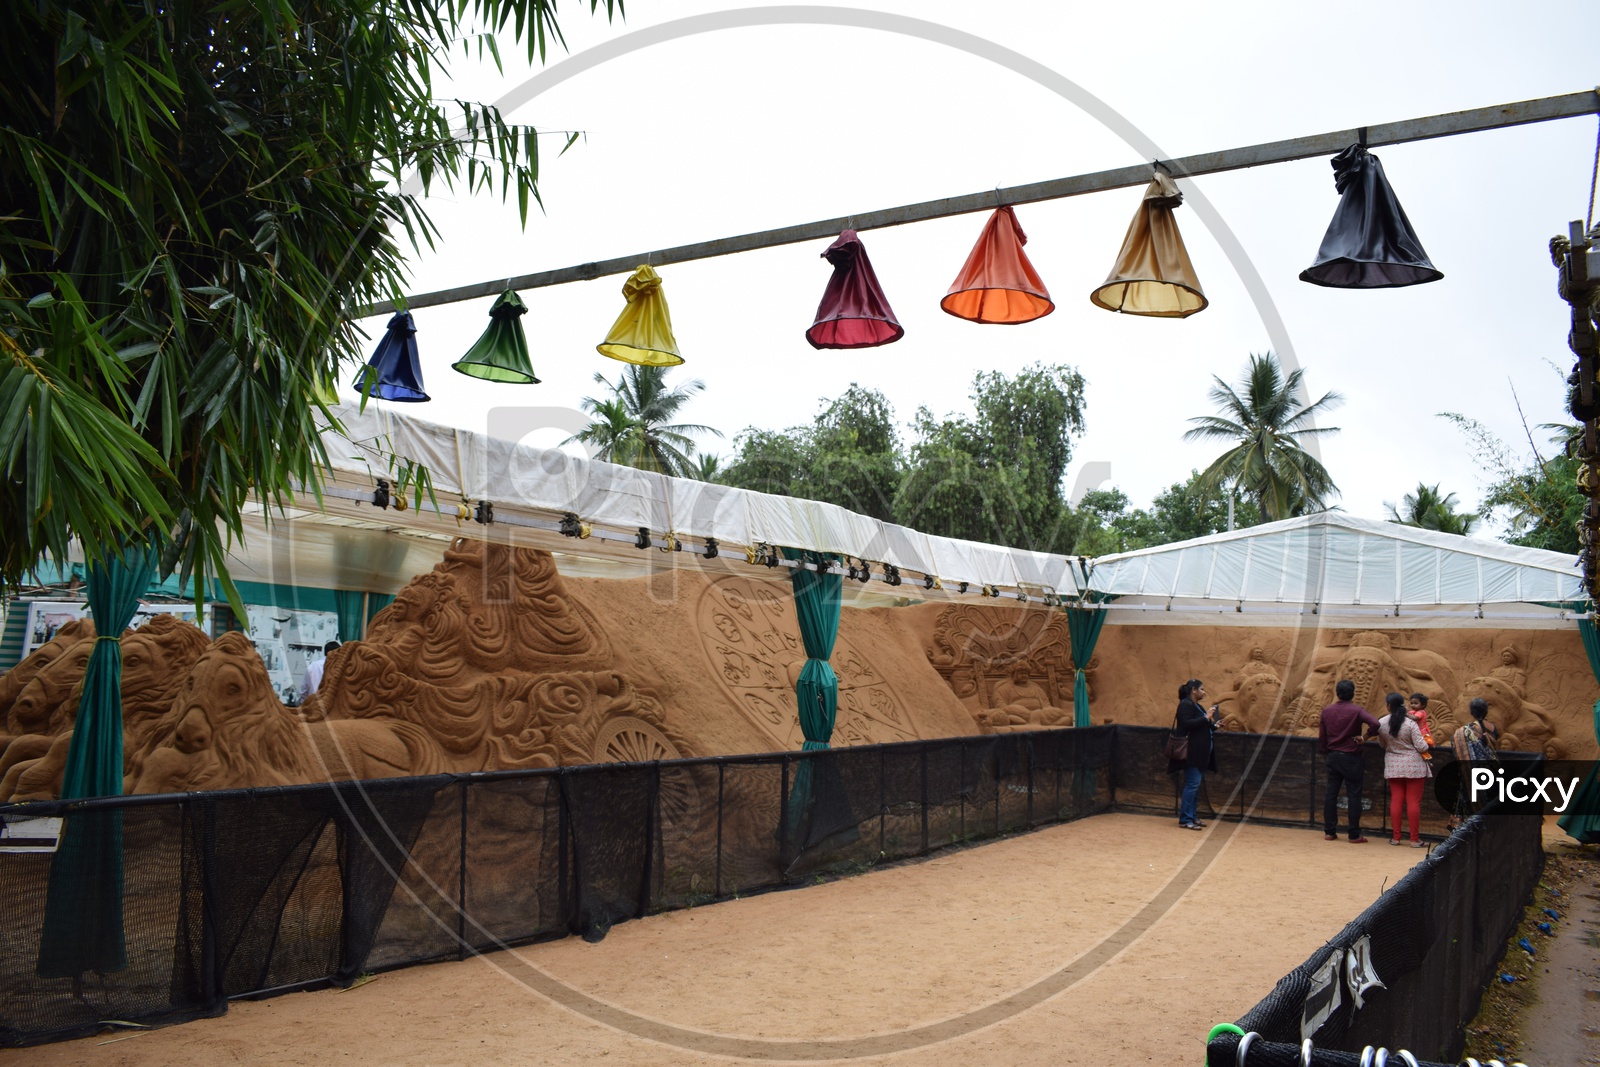 View of the Sand Sculpture Museum